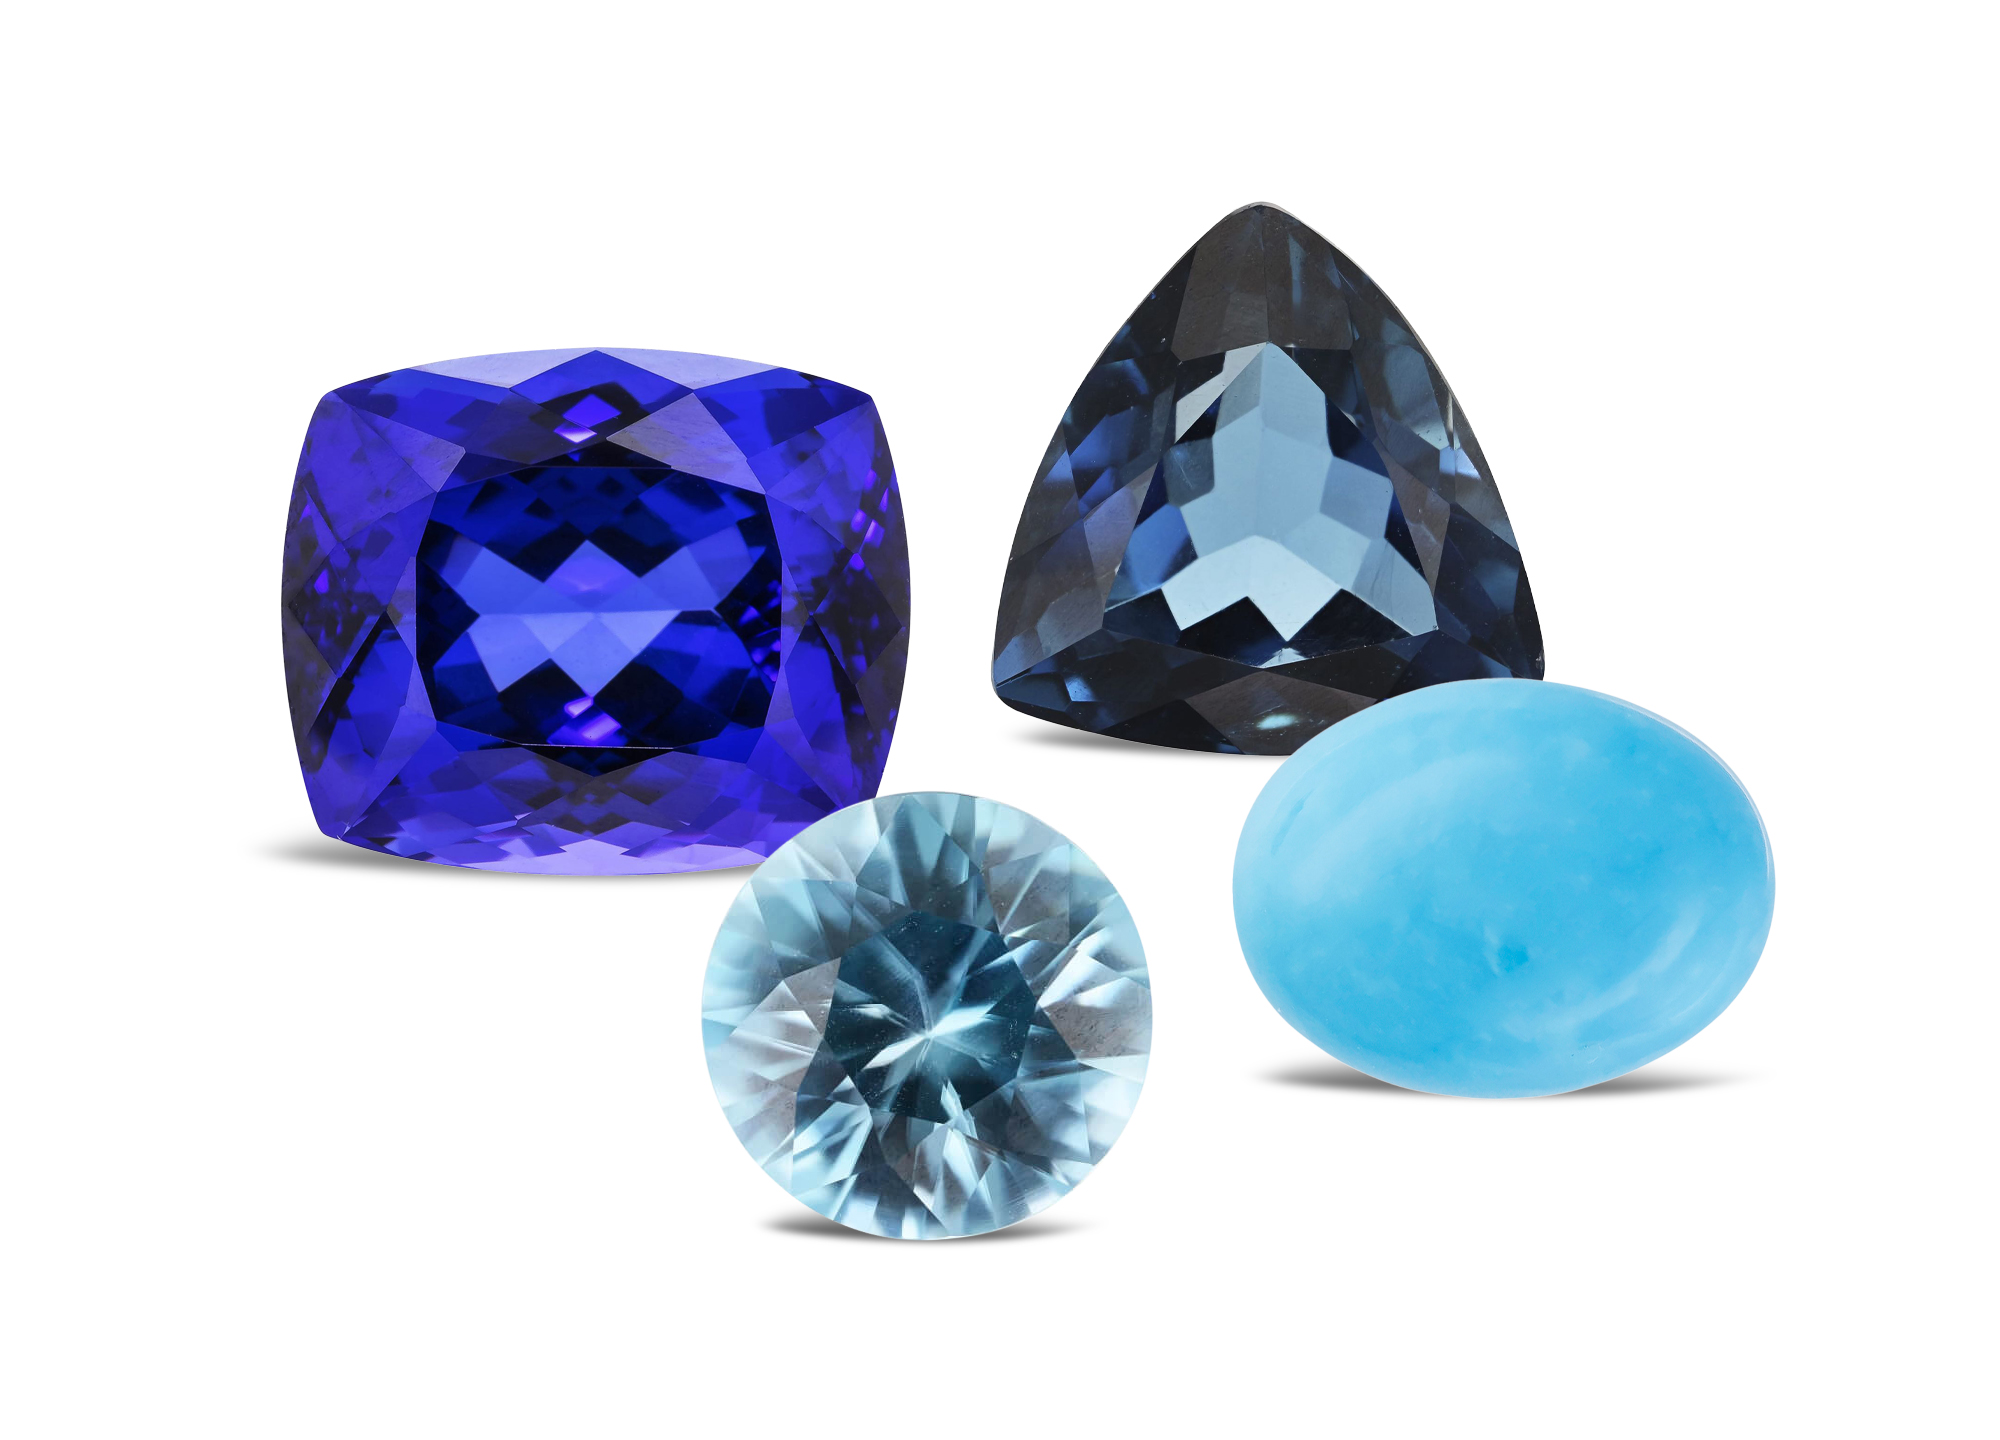 What Is The Birthstone For December?